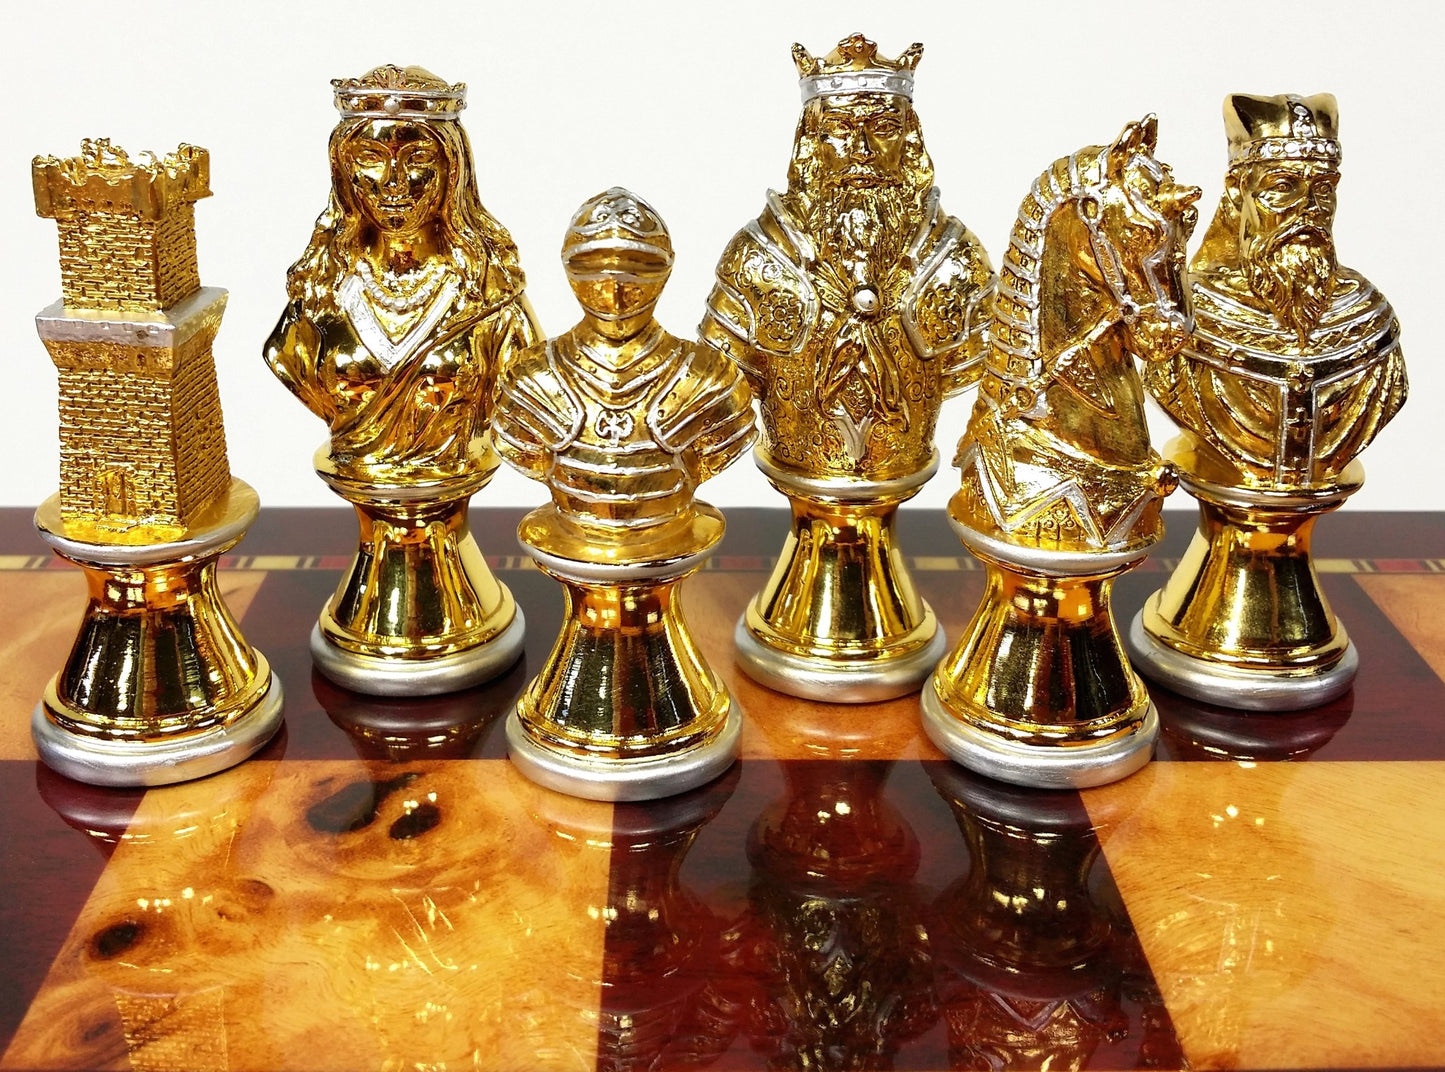 METAL Medieval Times Crusades Gold & Silver Busts Chess Set 18" Cherry Color Bd